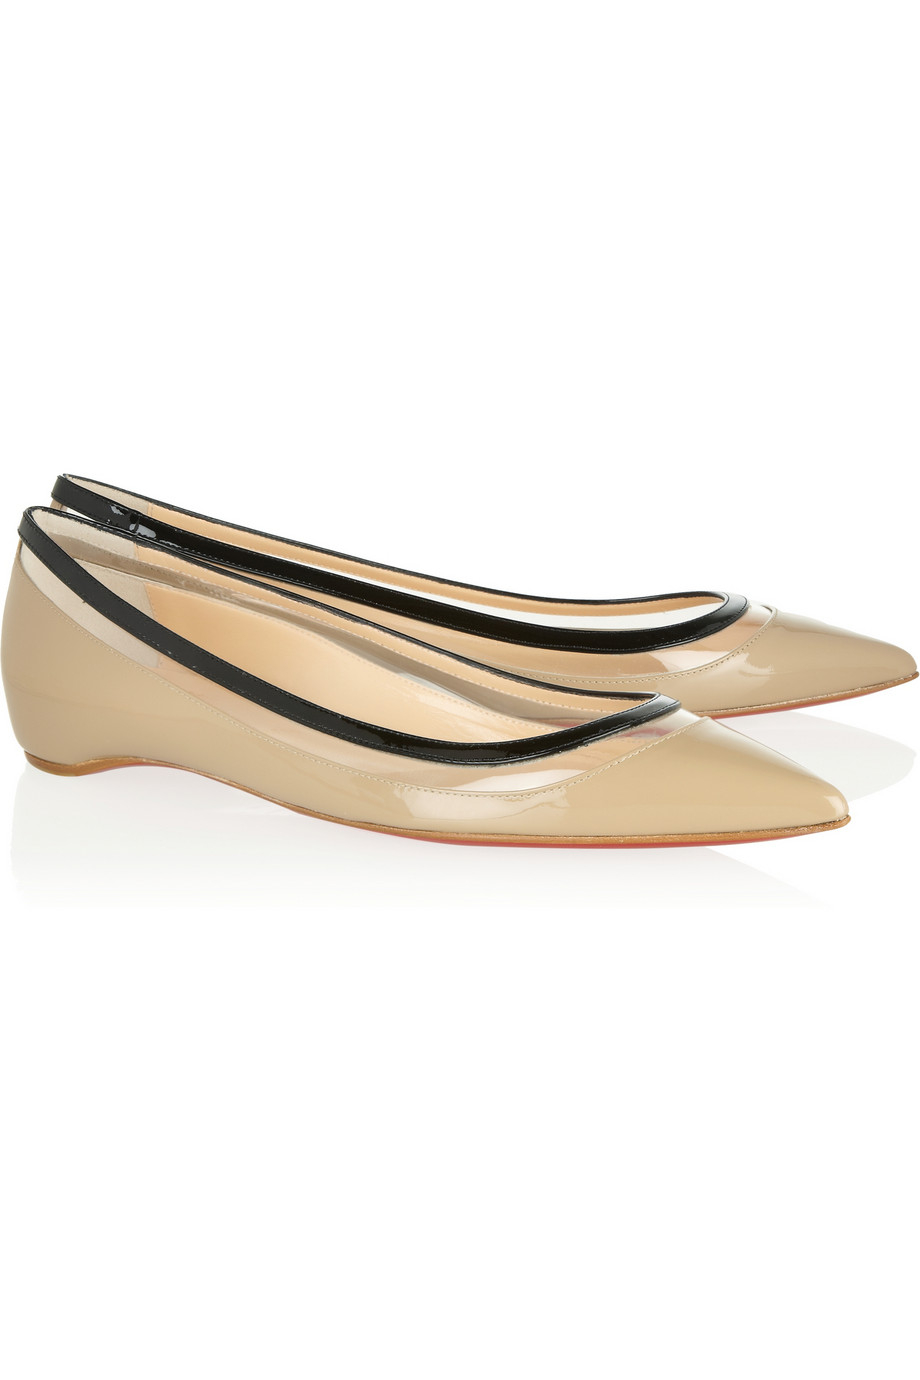 louboutin shoes fake - christian louboutin pointed-toe flats Clear PVC | The Little Arts ...